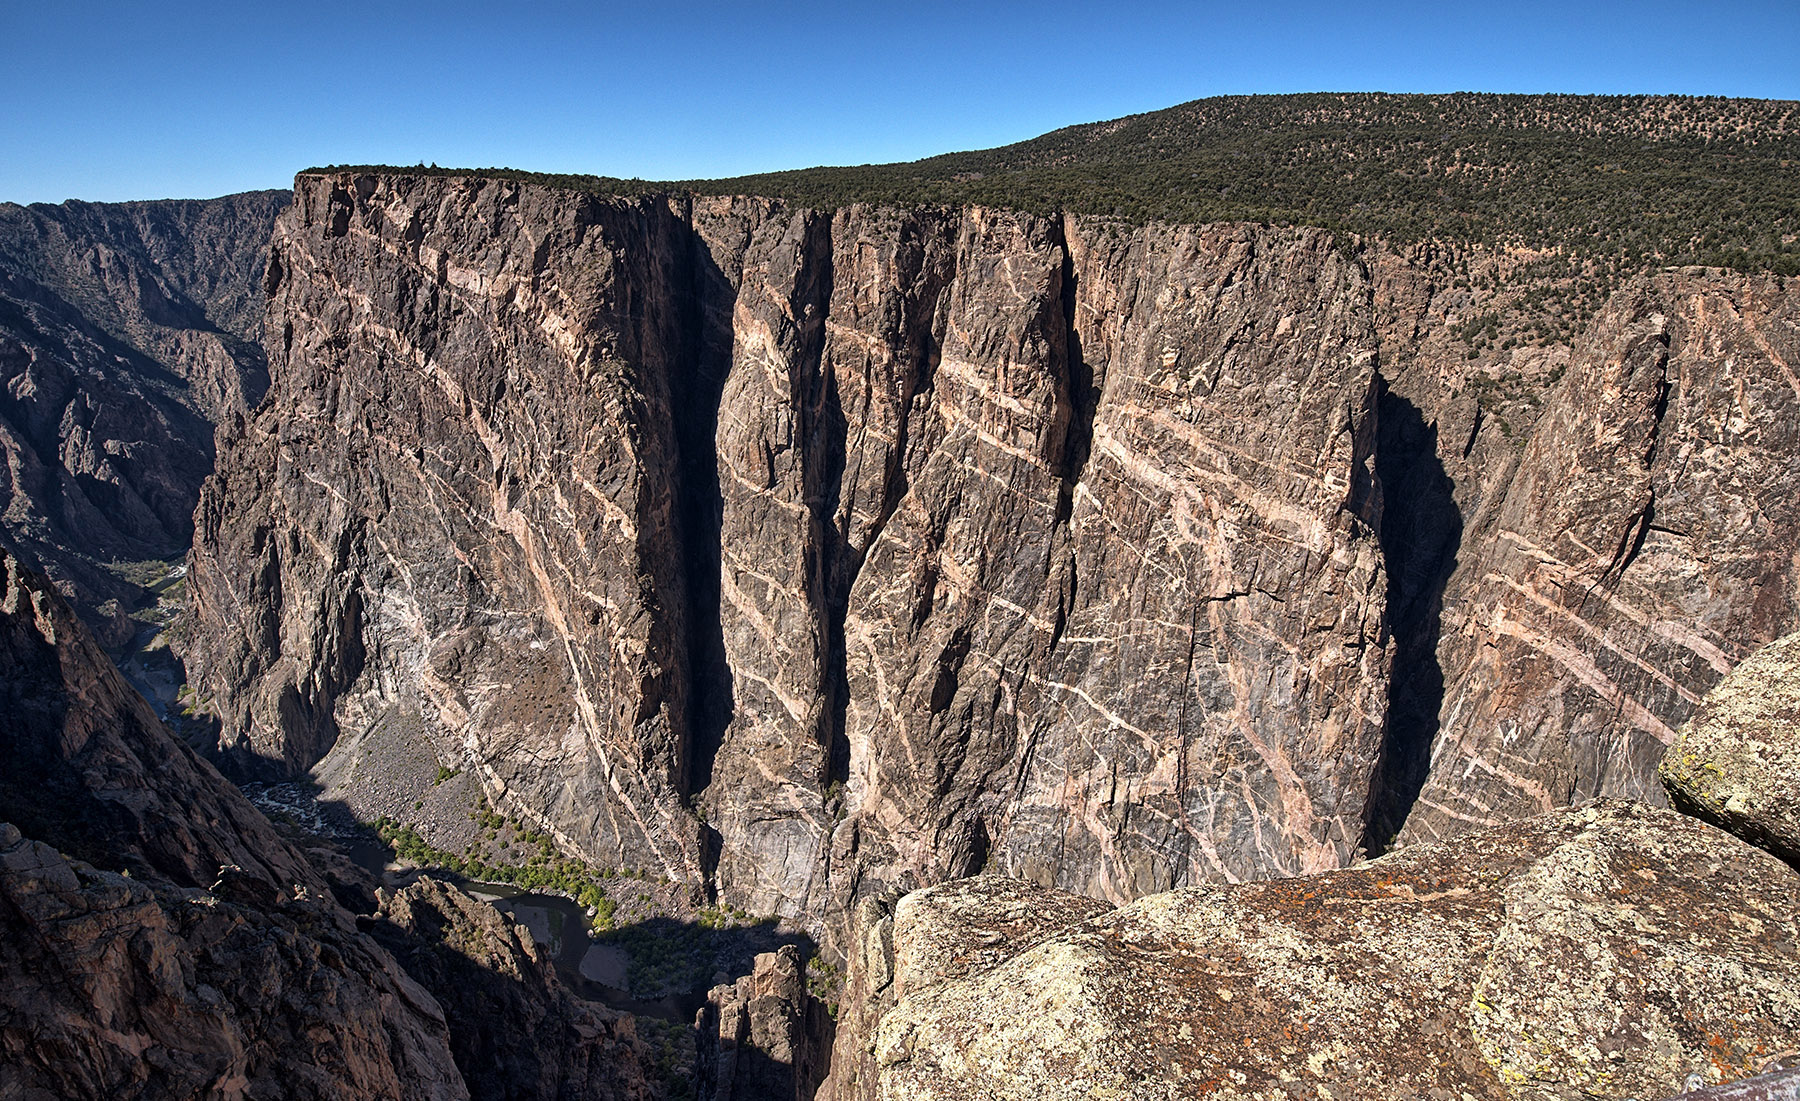 2300 foot Painted Wall, Black Canyon of the Gunnison.  1800 Ma gneiss was penetrated by veins of pegmatite powered by a 1,400 Ma intrusion of granite pushing hot fluids rich in feldspar and quartz that crystallized as it cooled to form pegmatite.